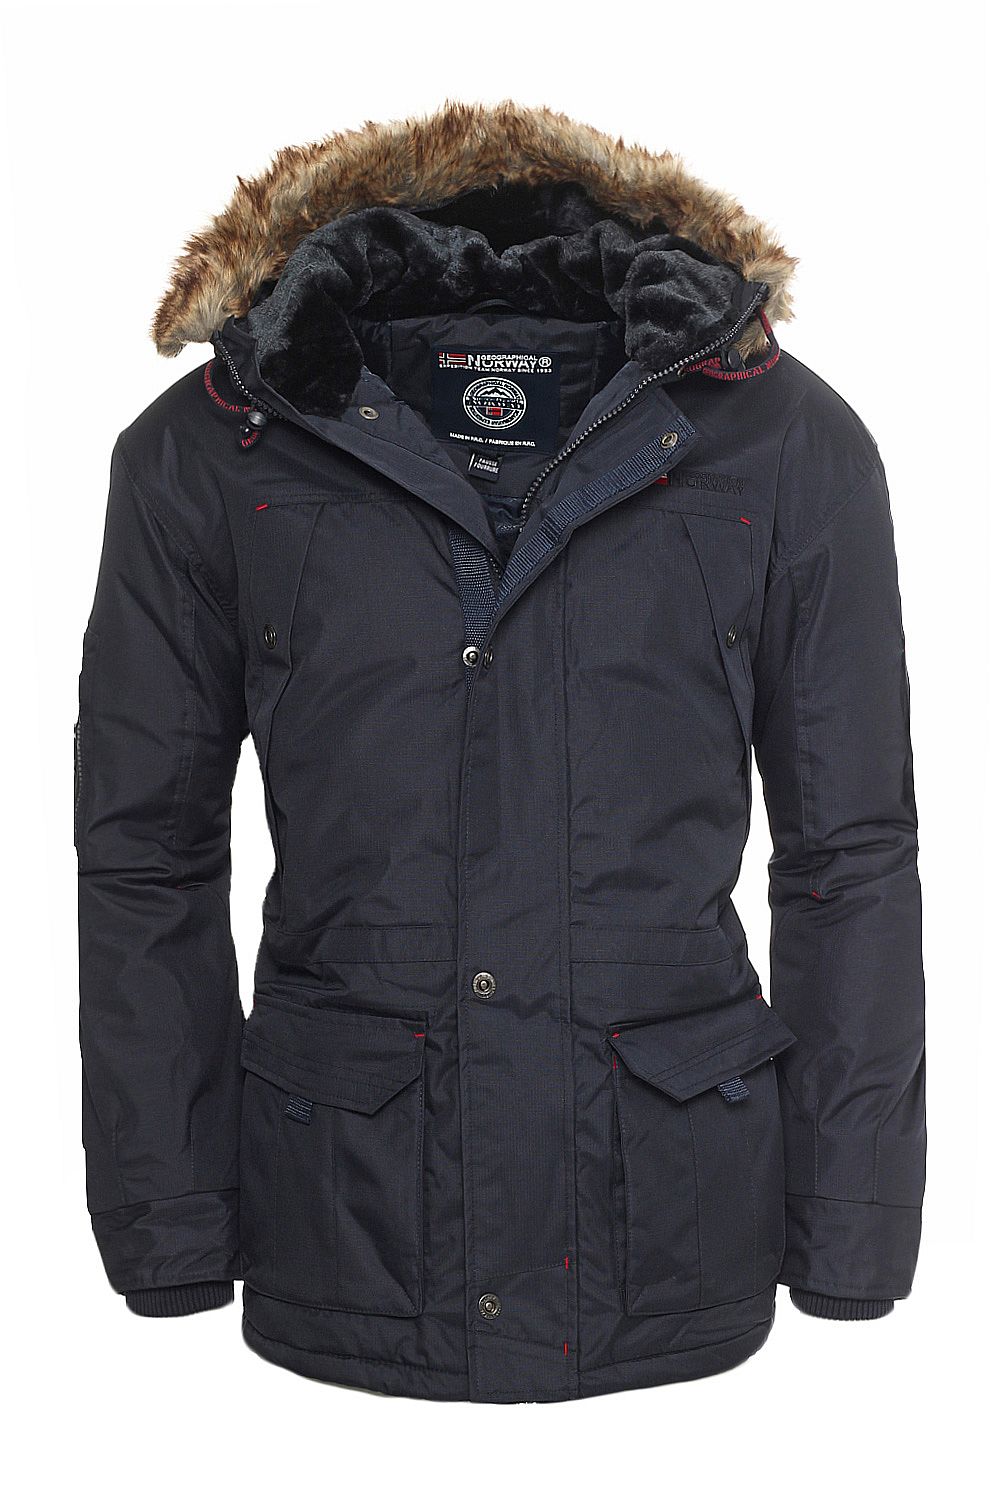 Geographical Norway Parka Anaconda Winter Jacke Outdoor Funktions Parka ...